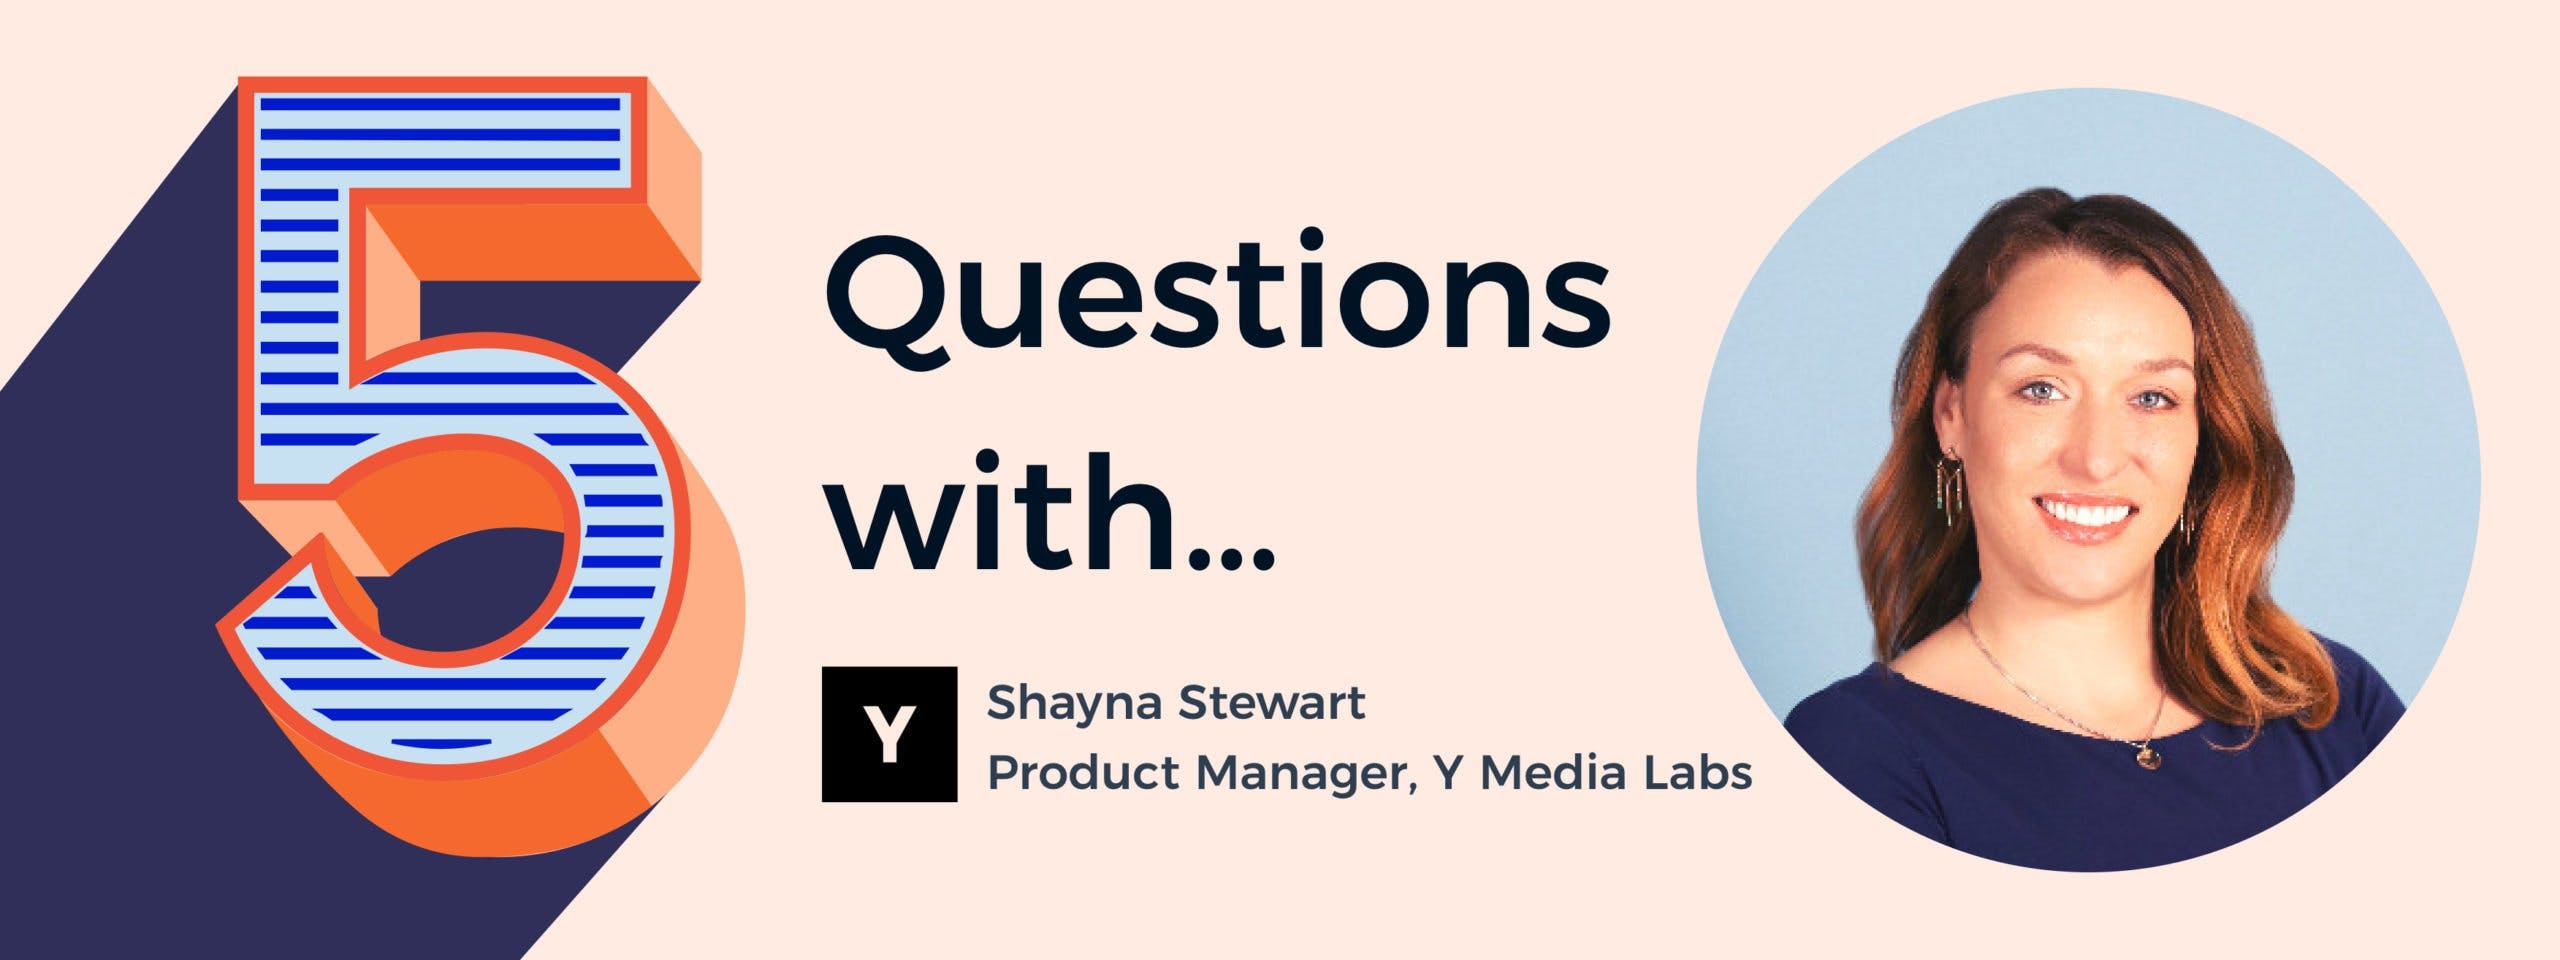 5 Questions with Shayna Stewart, Digital Product Manager at Y Media Labs